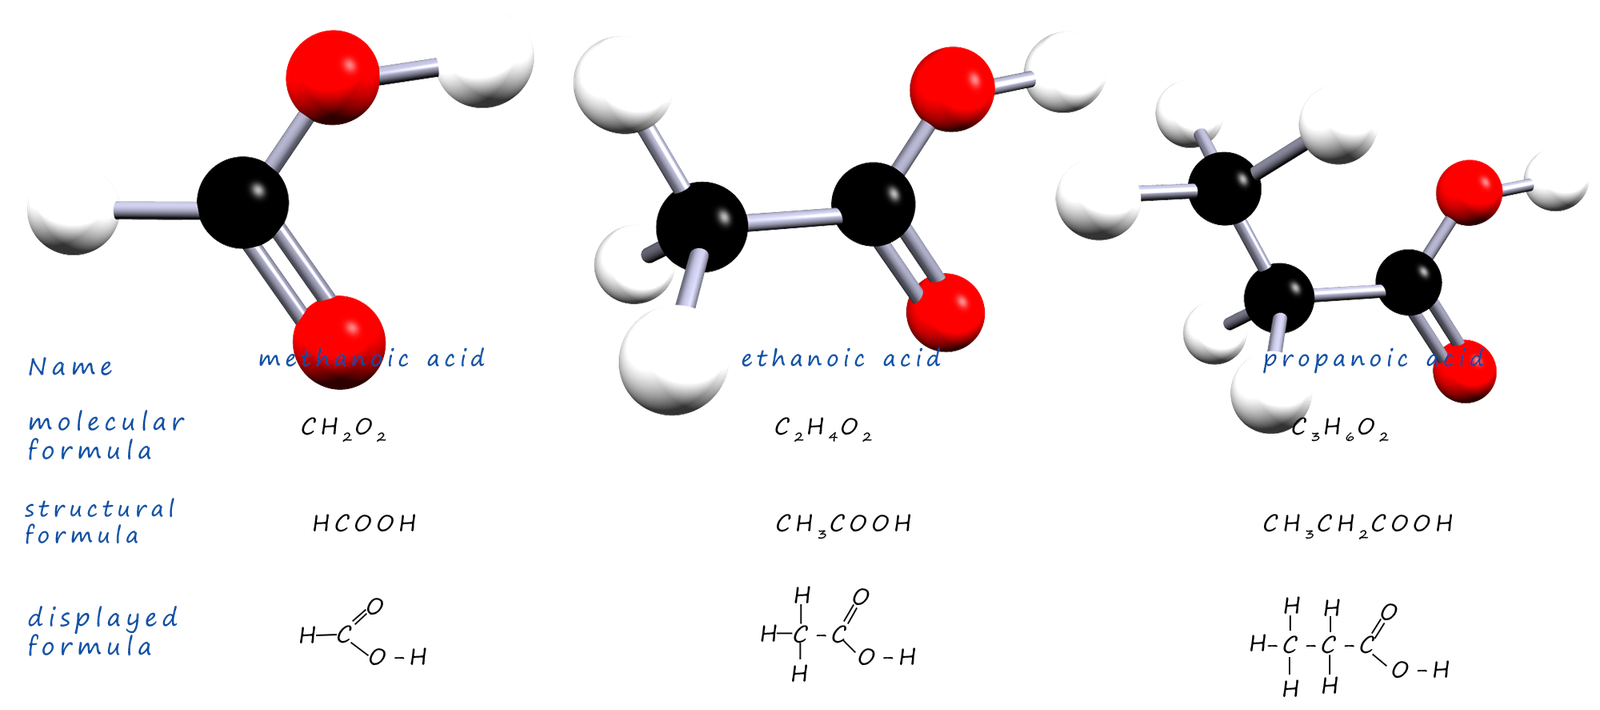 3d Models of the first three carboxylic acids, displayed formula and molecular formula also given.